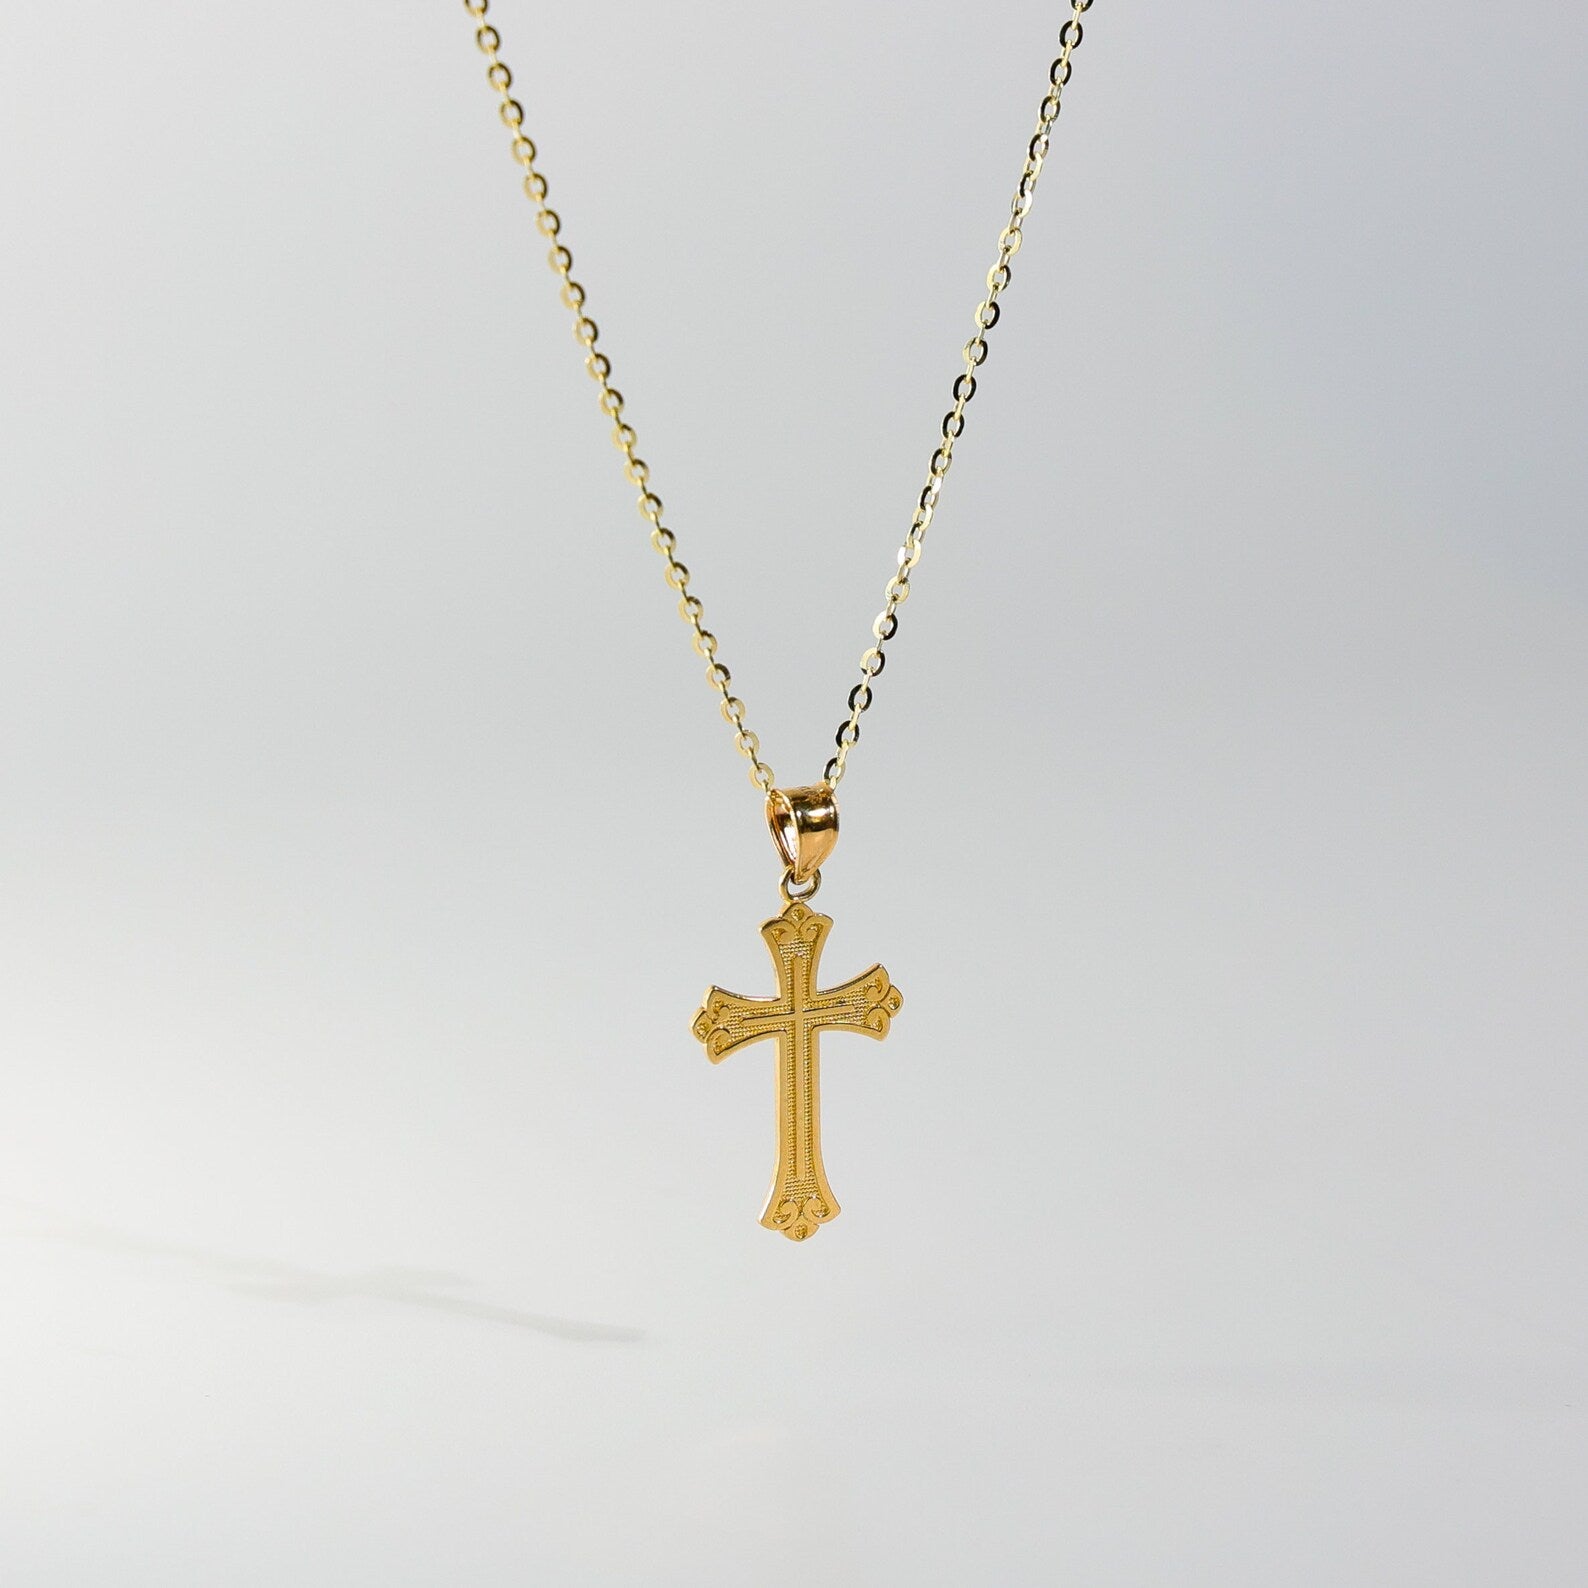 Gold Budded Cross Pendant Model-0128 - Charlie & Co. Jewelry